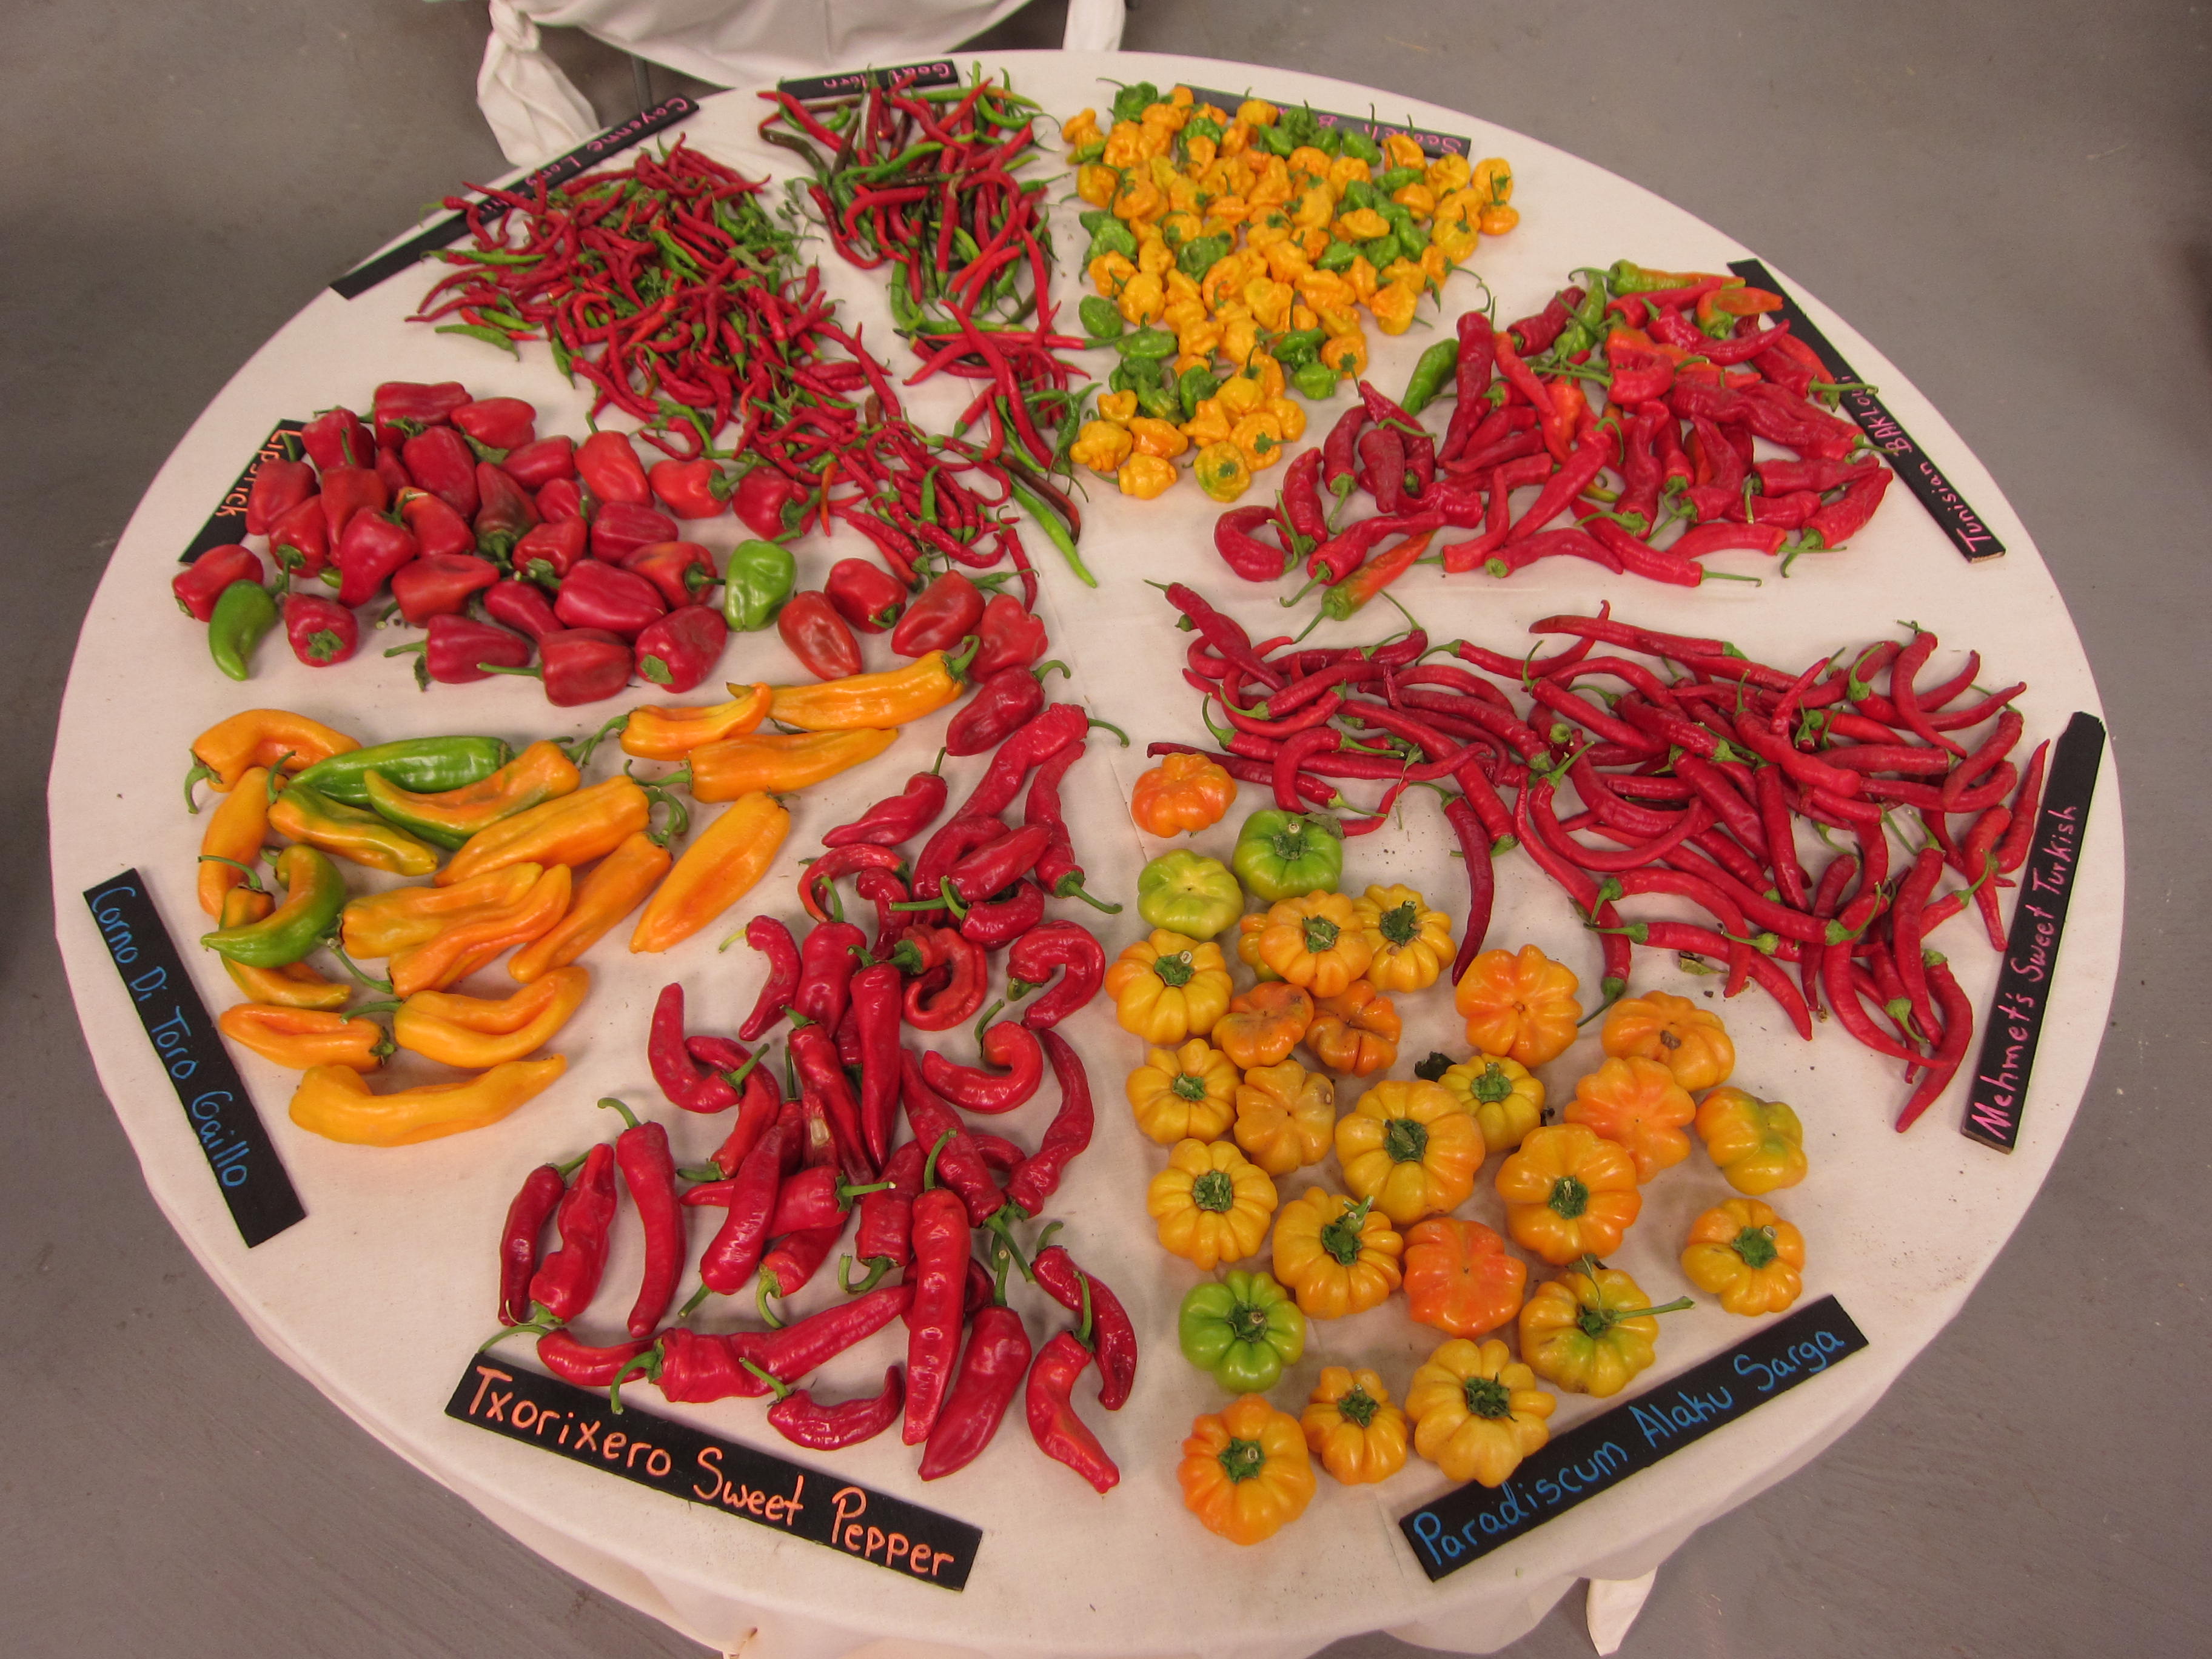 Peppers on display.